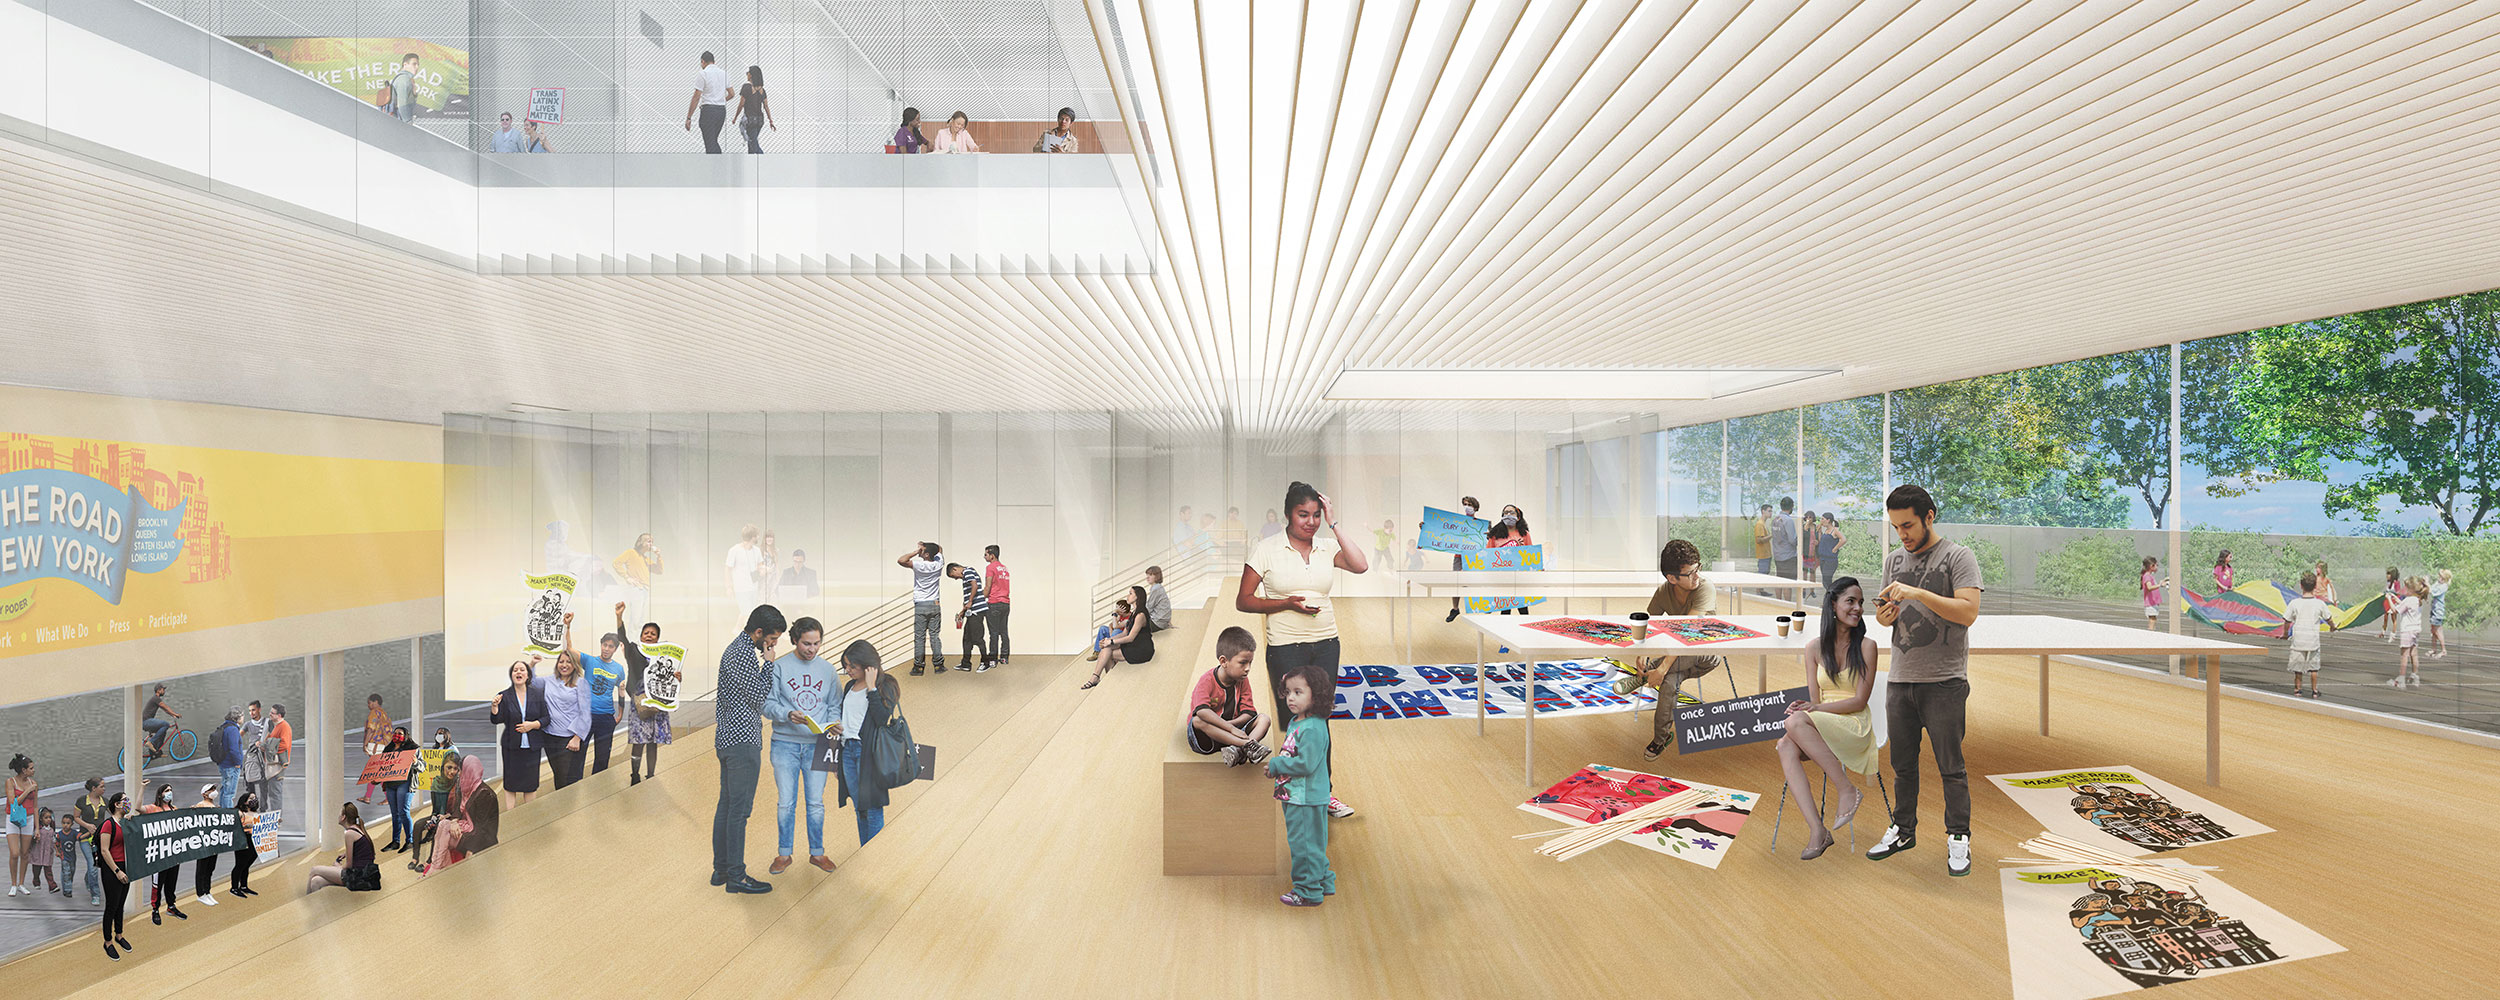 Make the Road New York Community Center. Architect: TEN Arquitectos with Andrea Steele Architecture. Location: Queens, NY. Image: TEN Arquitectos/Enrique Norten with Andrea Steele Architecture/Andrea Steele.